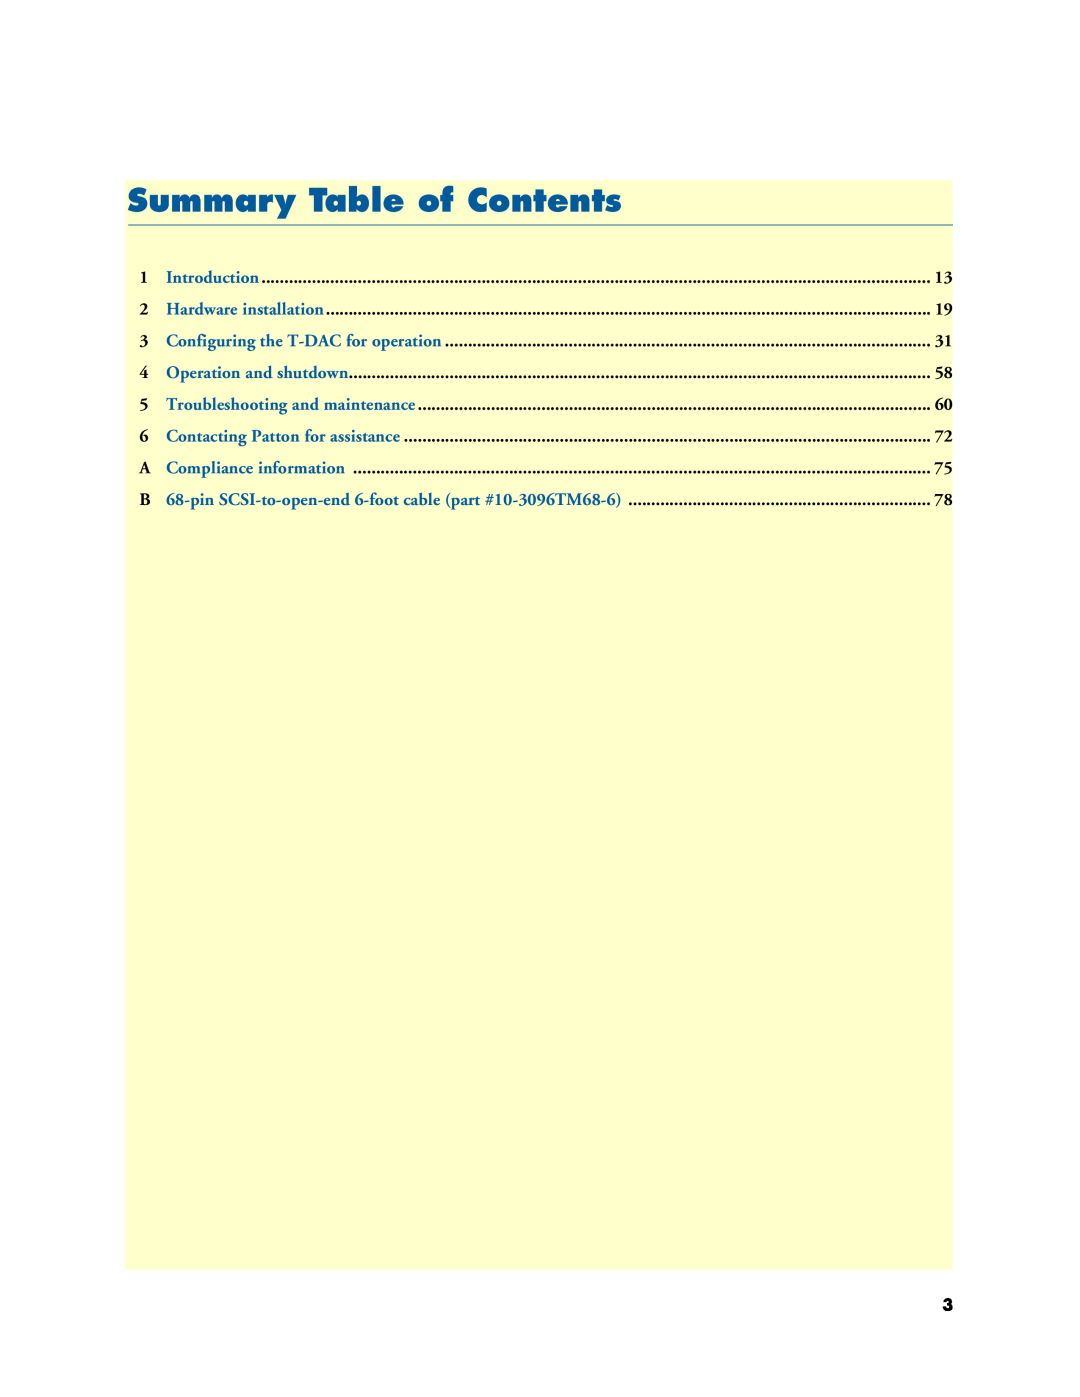 Patton electronic 2616RC user manual Summary Table of Contents 